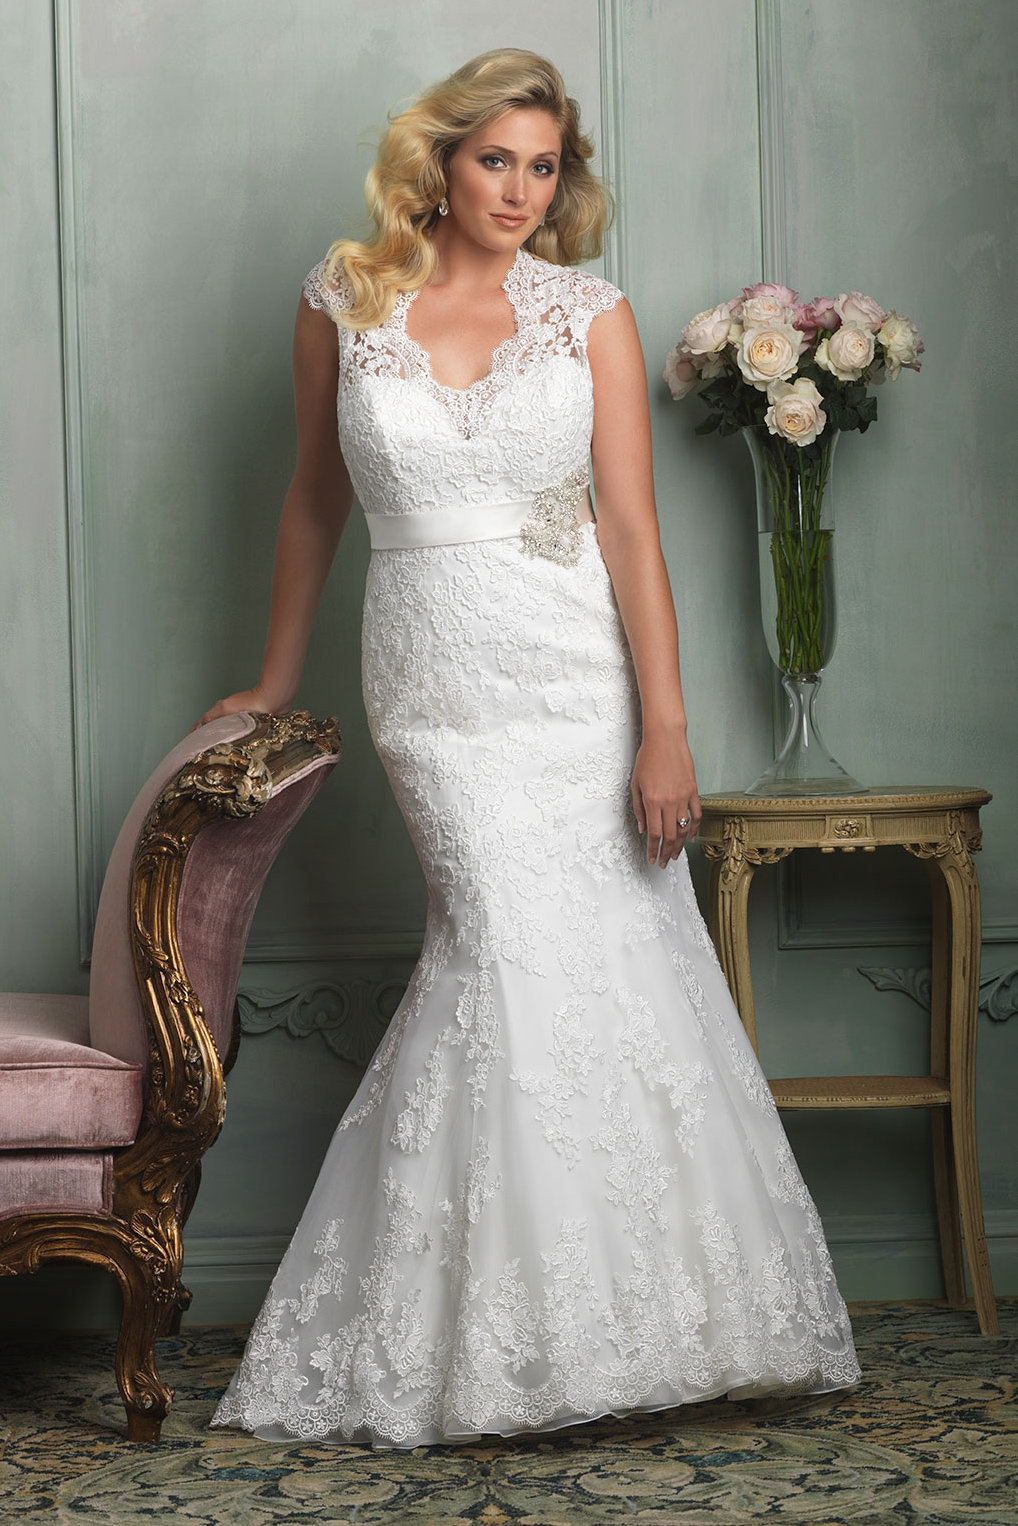 What Style Wedding Dress Is Best For Plus Size Brides?